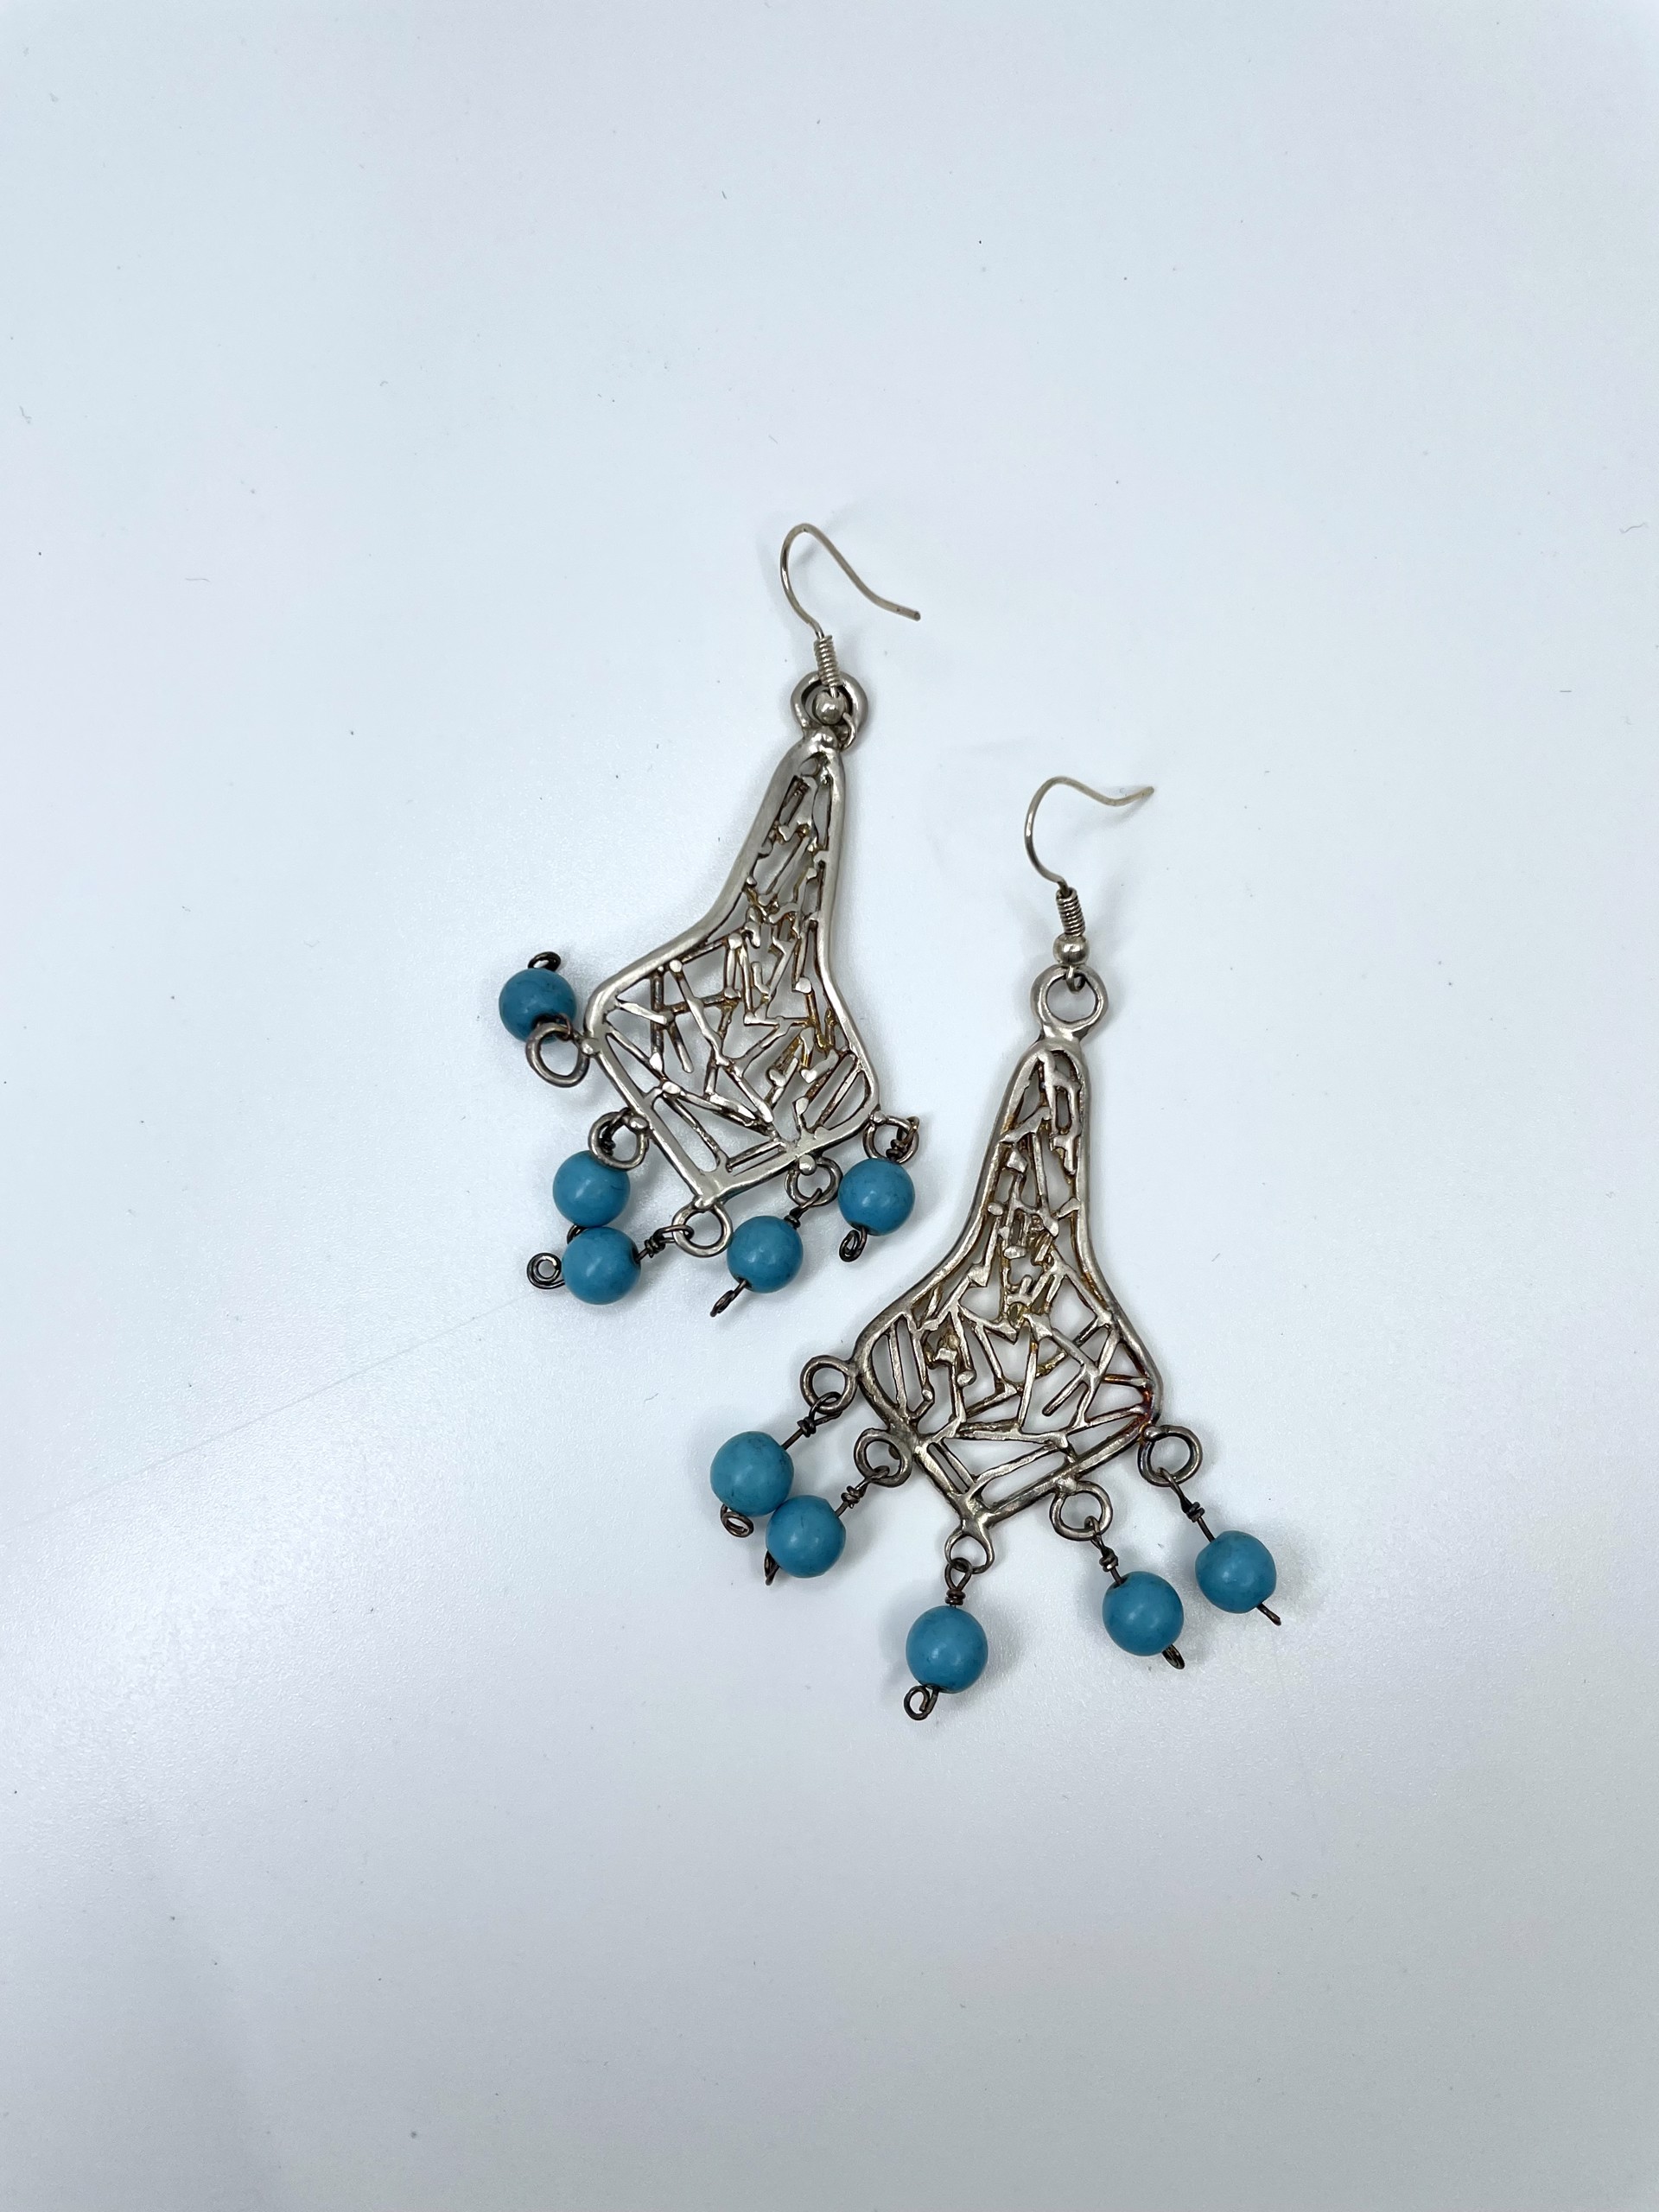 1511 Curvy Shaped Earrings with Turquoise Beads by Beth Benowich